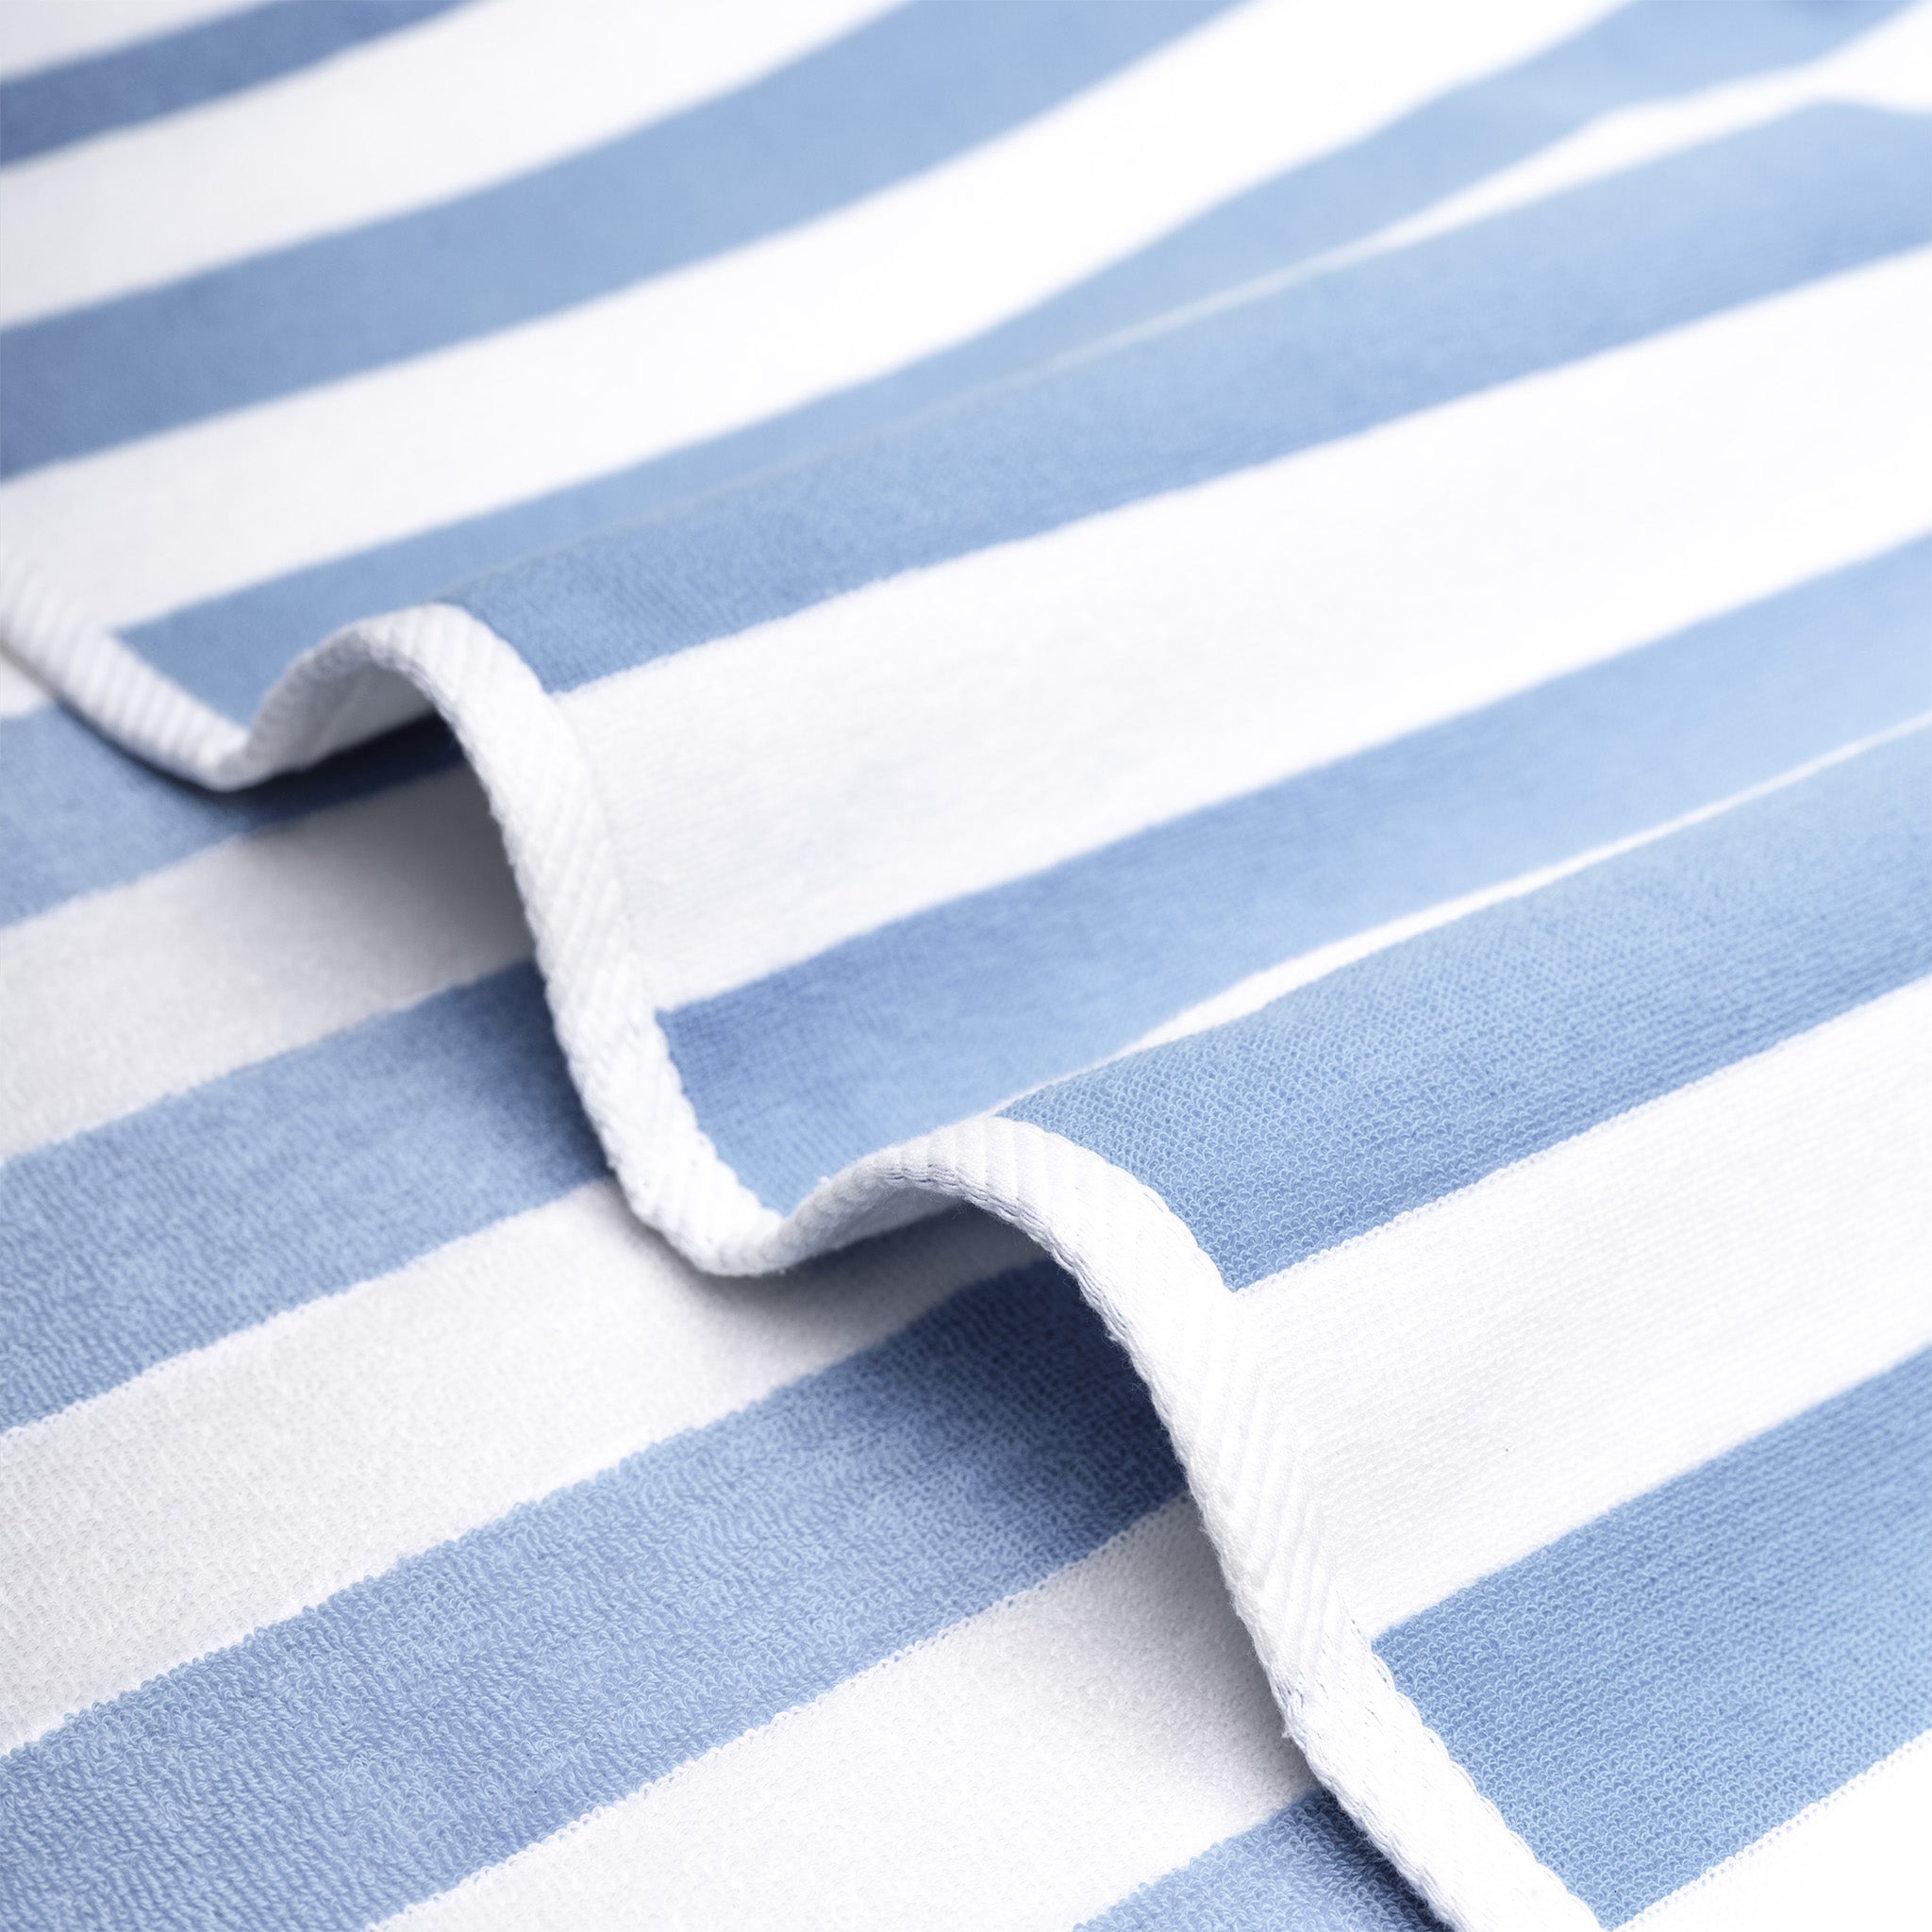 American Soft Linen 100% Cotton 4 Pack Beach Towels Cabana Striped Pool Towels -sky-blue-5